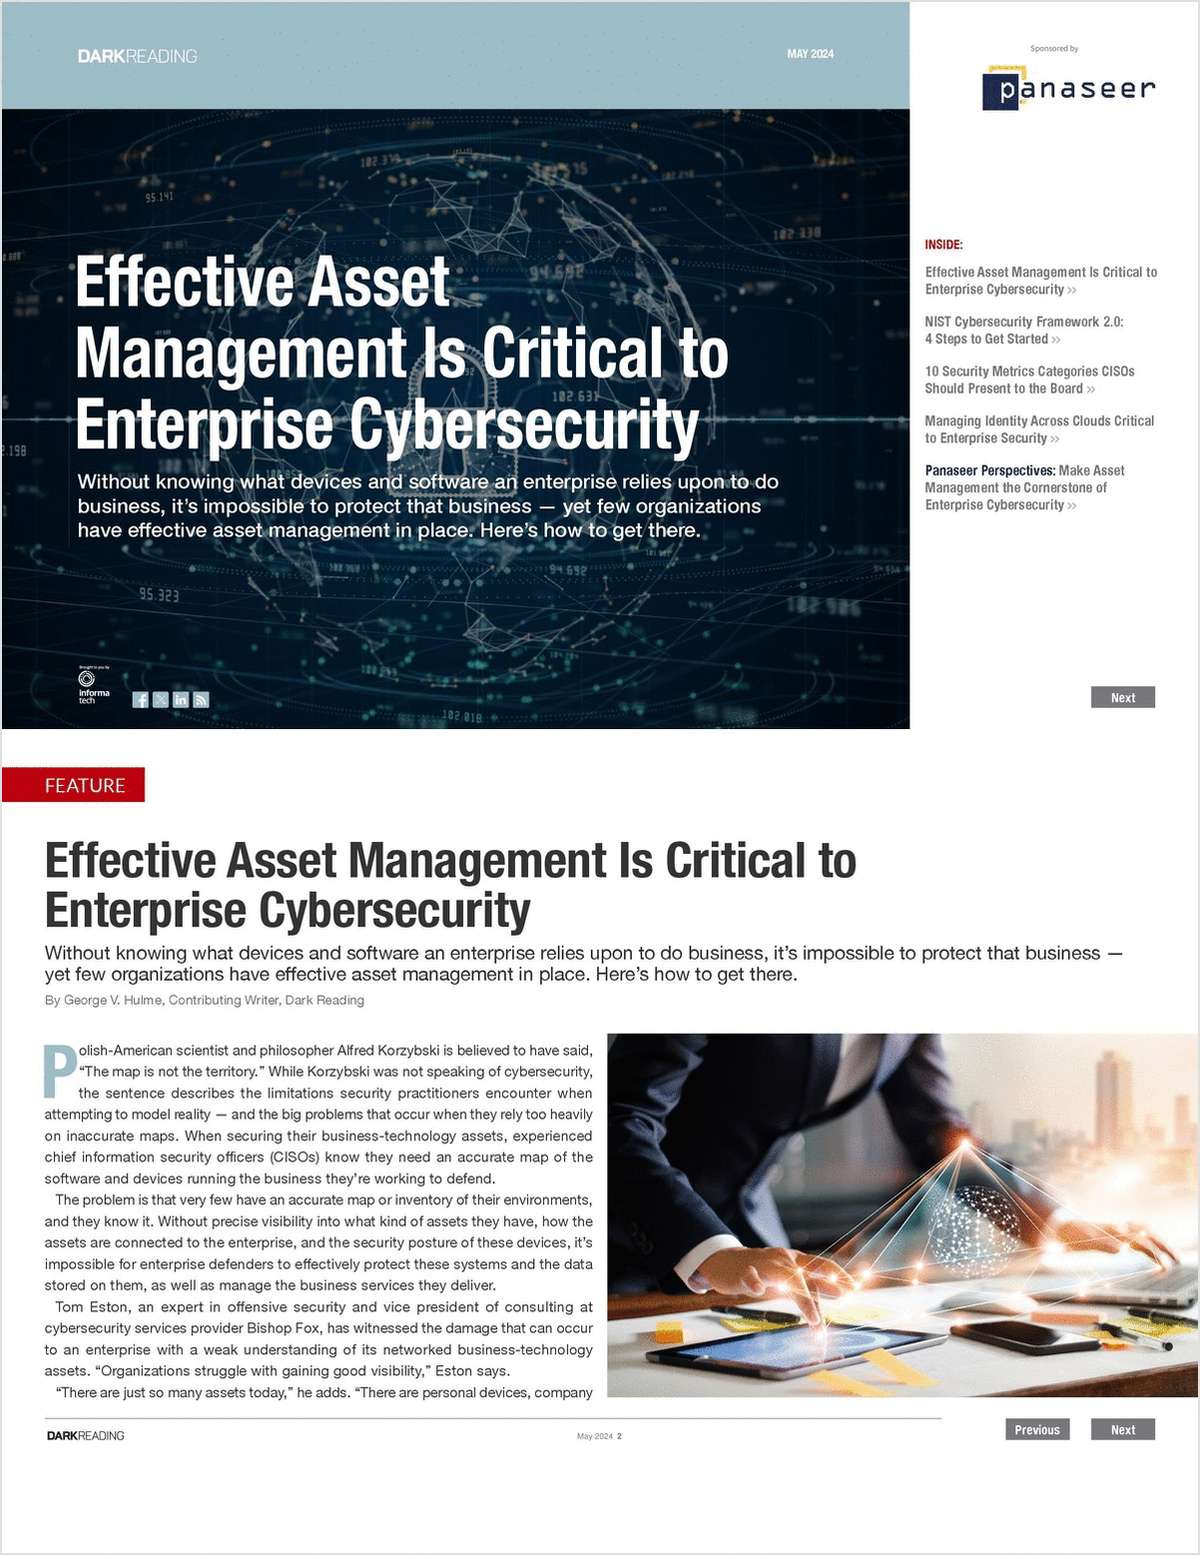 Effective Asset Management Is Critical to Enterprise Cybersecurity